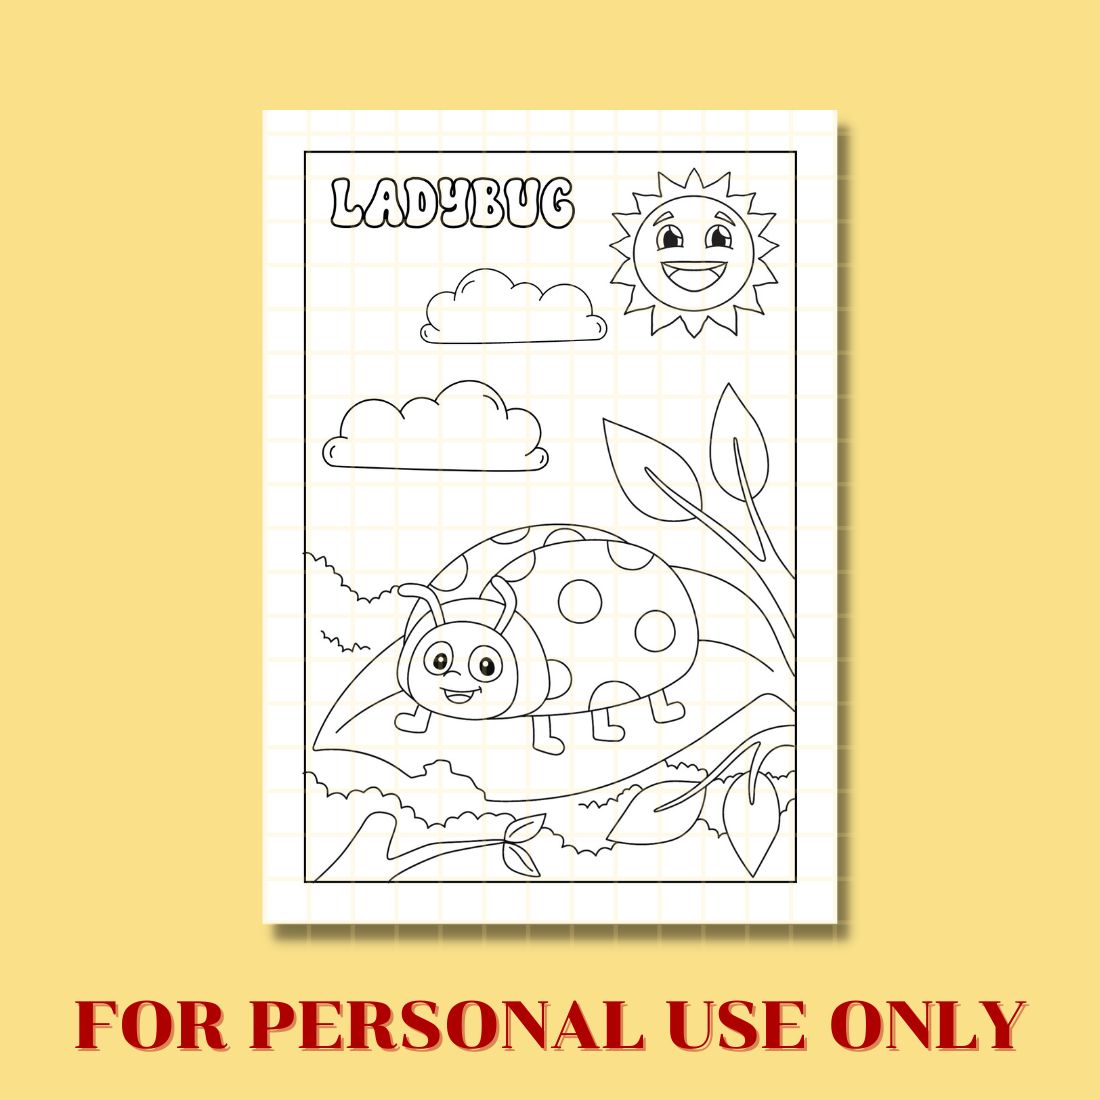 FREE LADYBUG COLORING PAGE preview image.